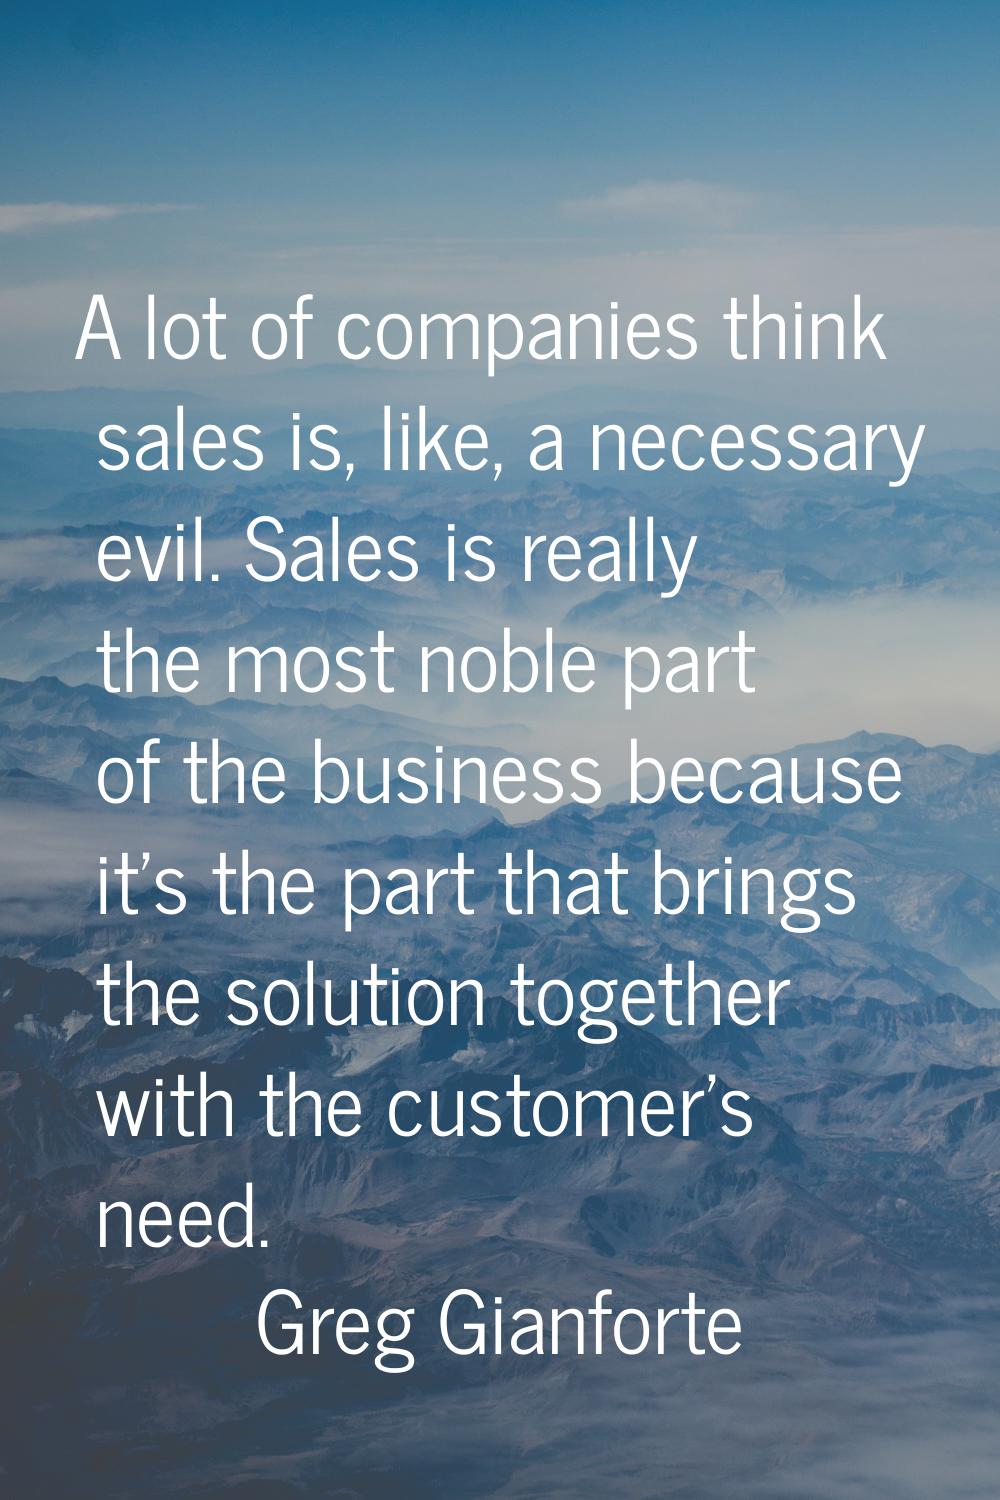 A lot of companies think sales is, like, a necessary evil. Sales is really the most noble part of t